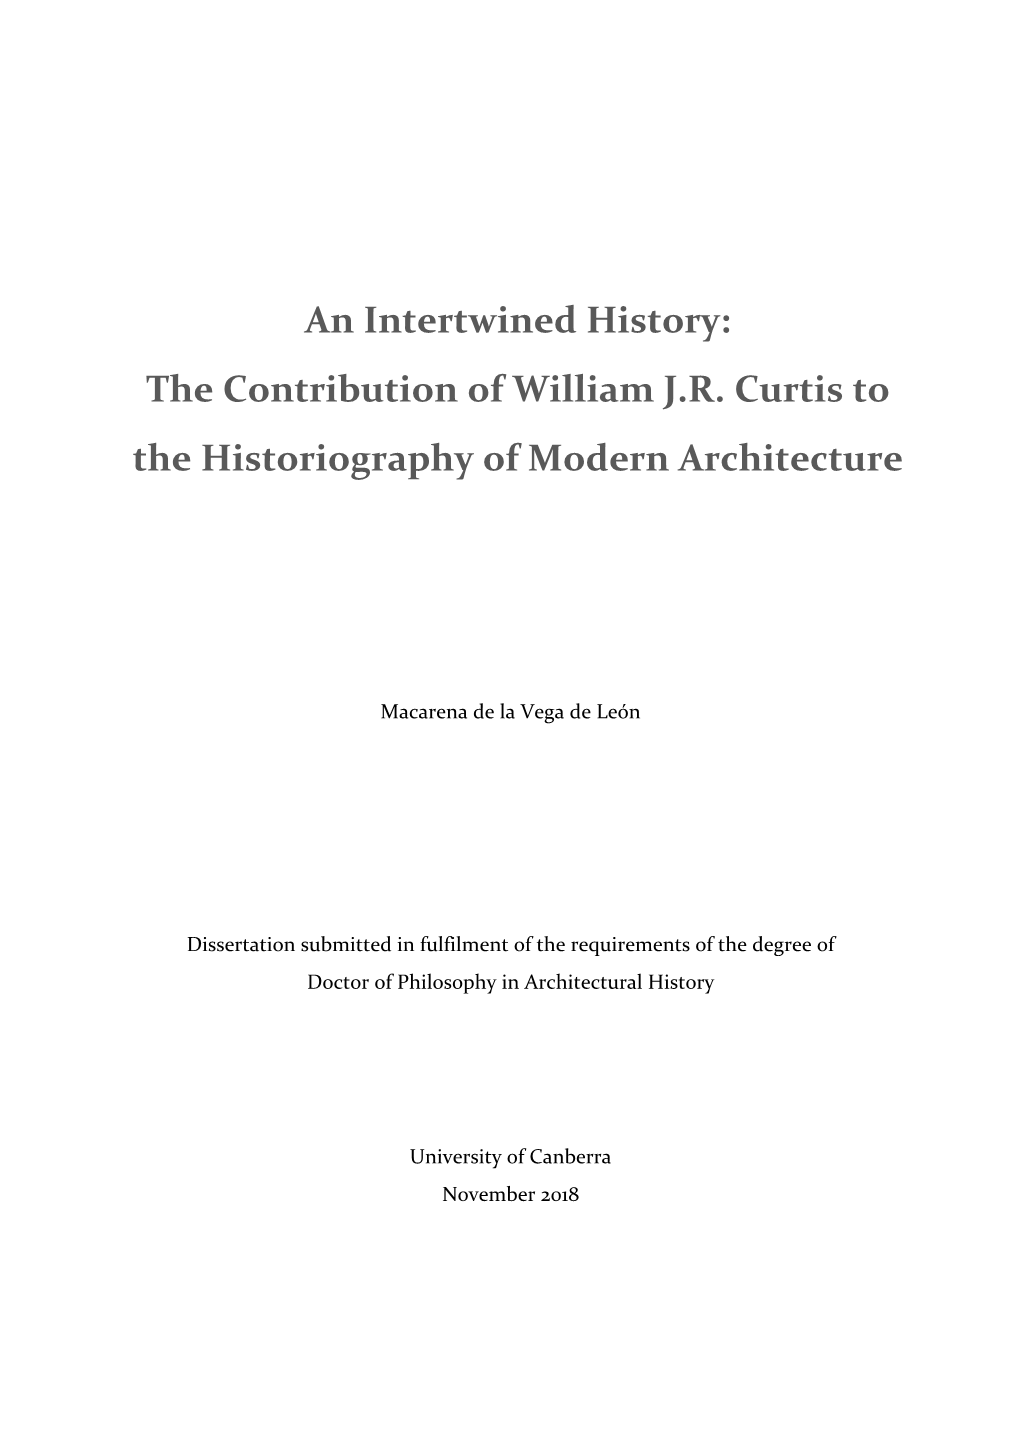 The Contribution of William JR Curtis to the Historiography of Modern